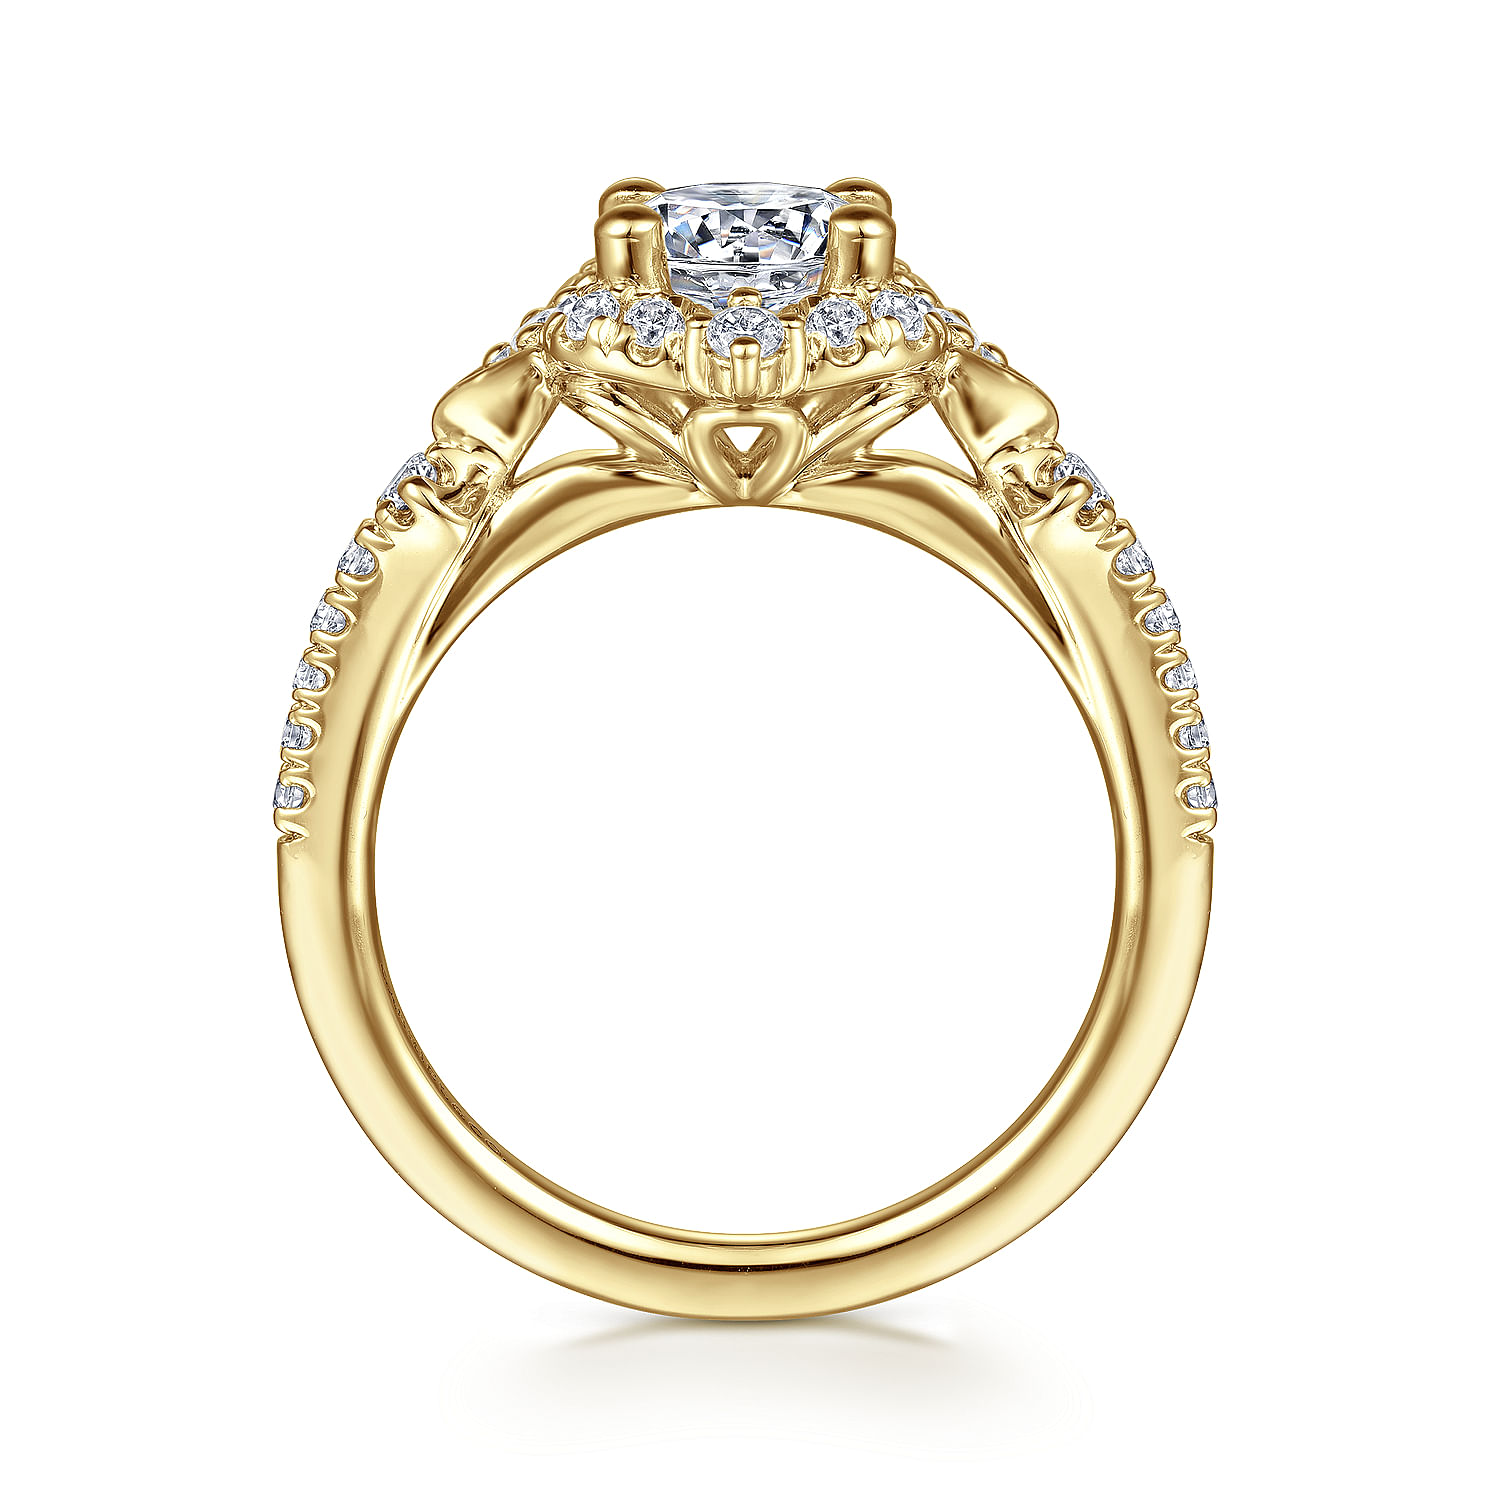 Unique 14K Yellow Gold Vintage Inspired Halo Diamond Engagement Ring